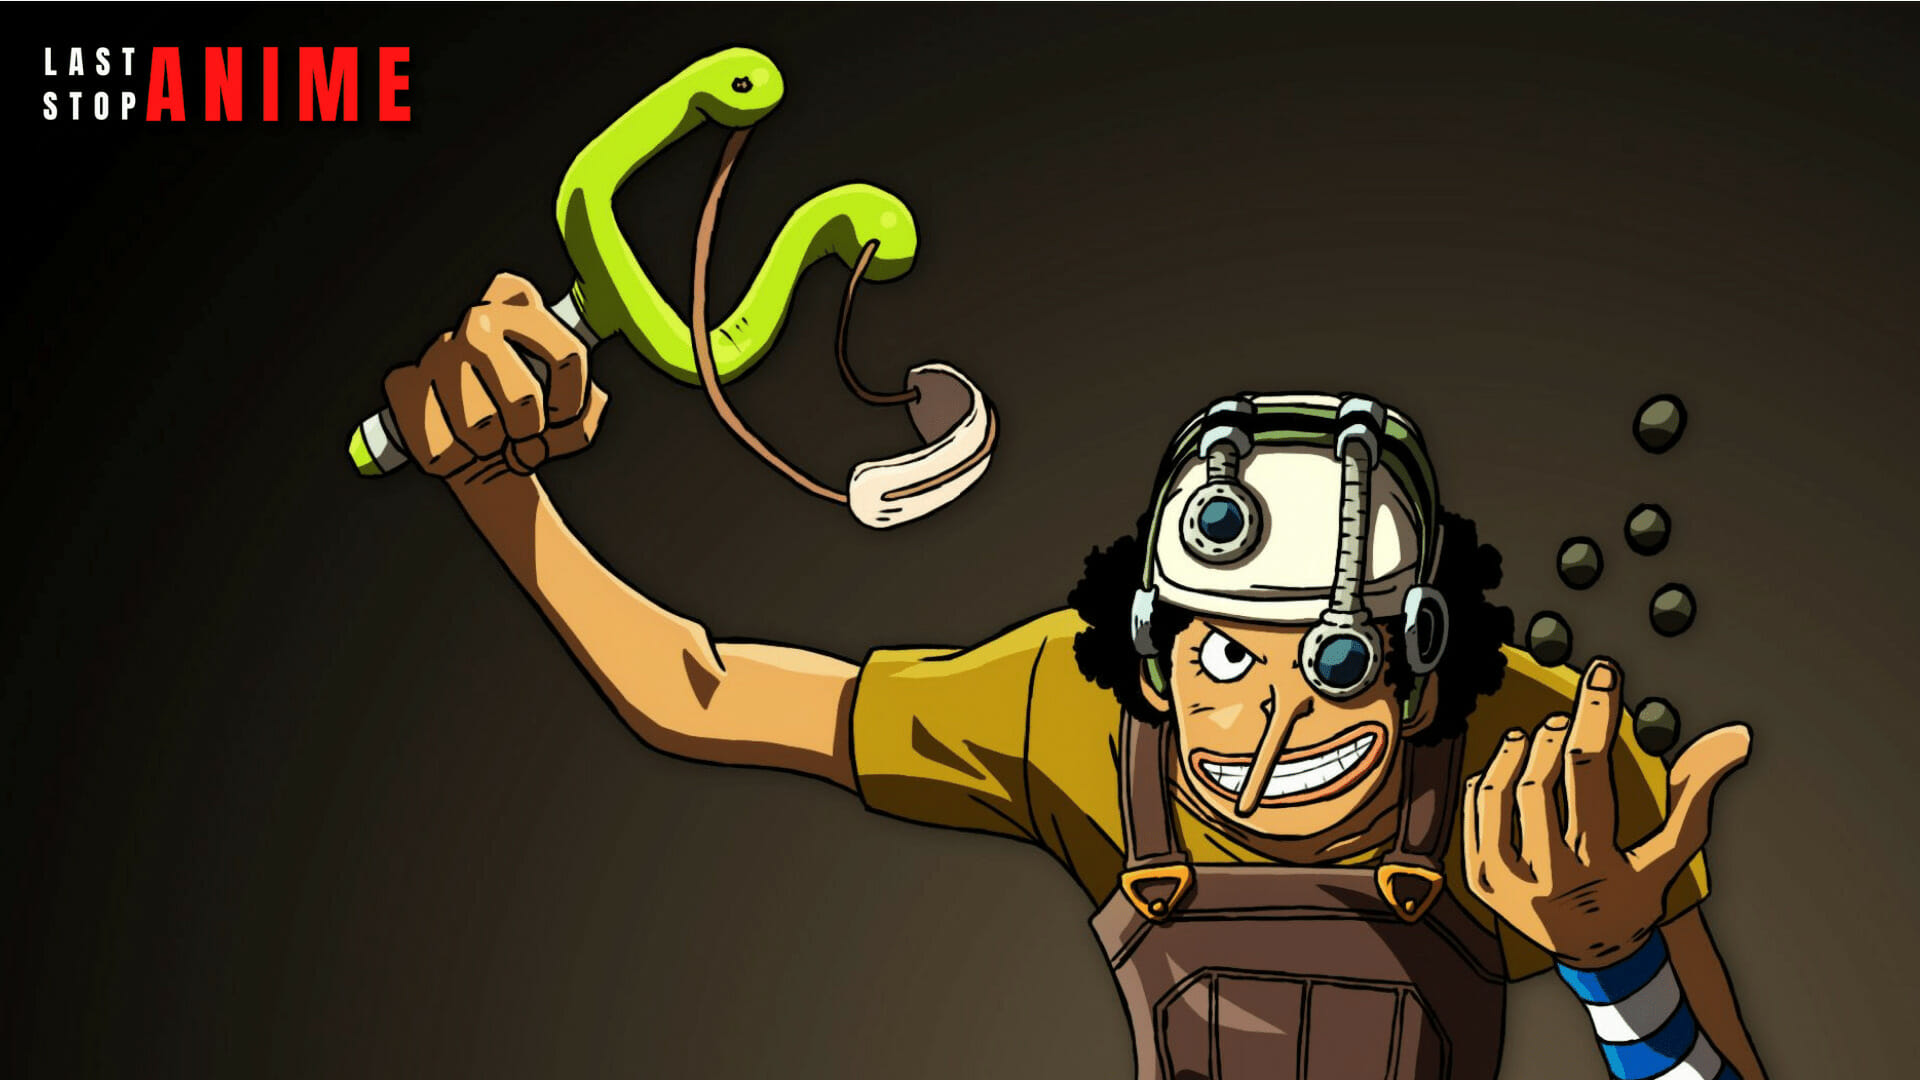 Usopp Animated Art Inspired From One Piece